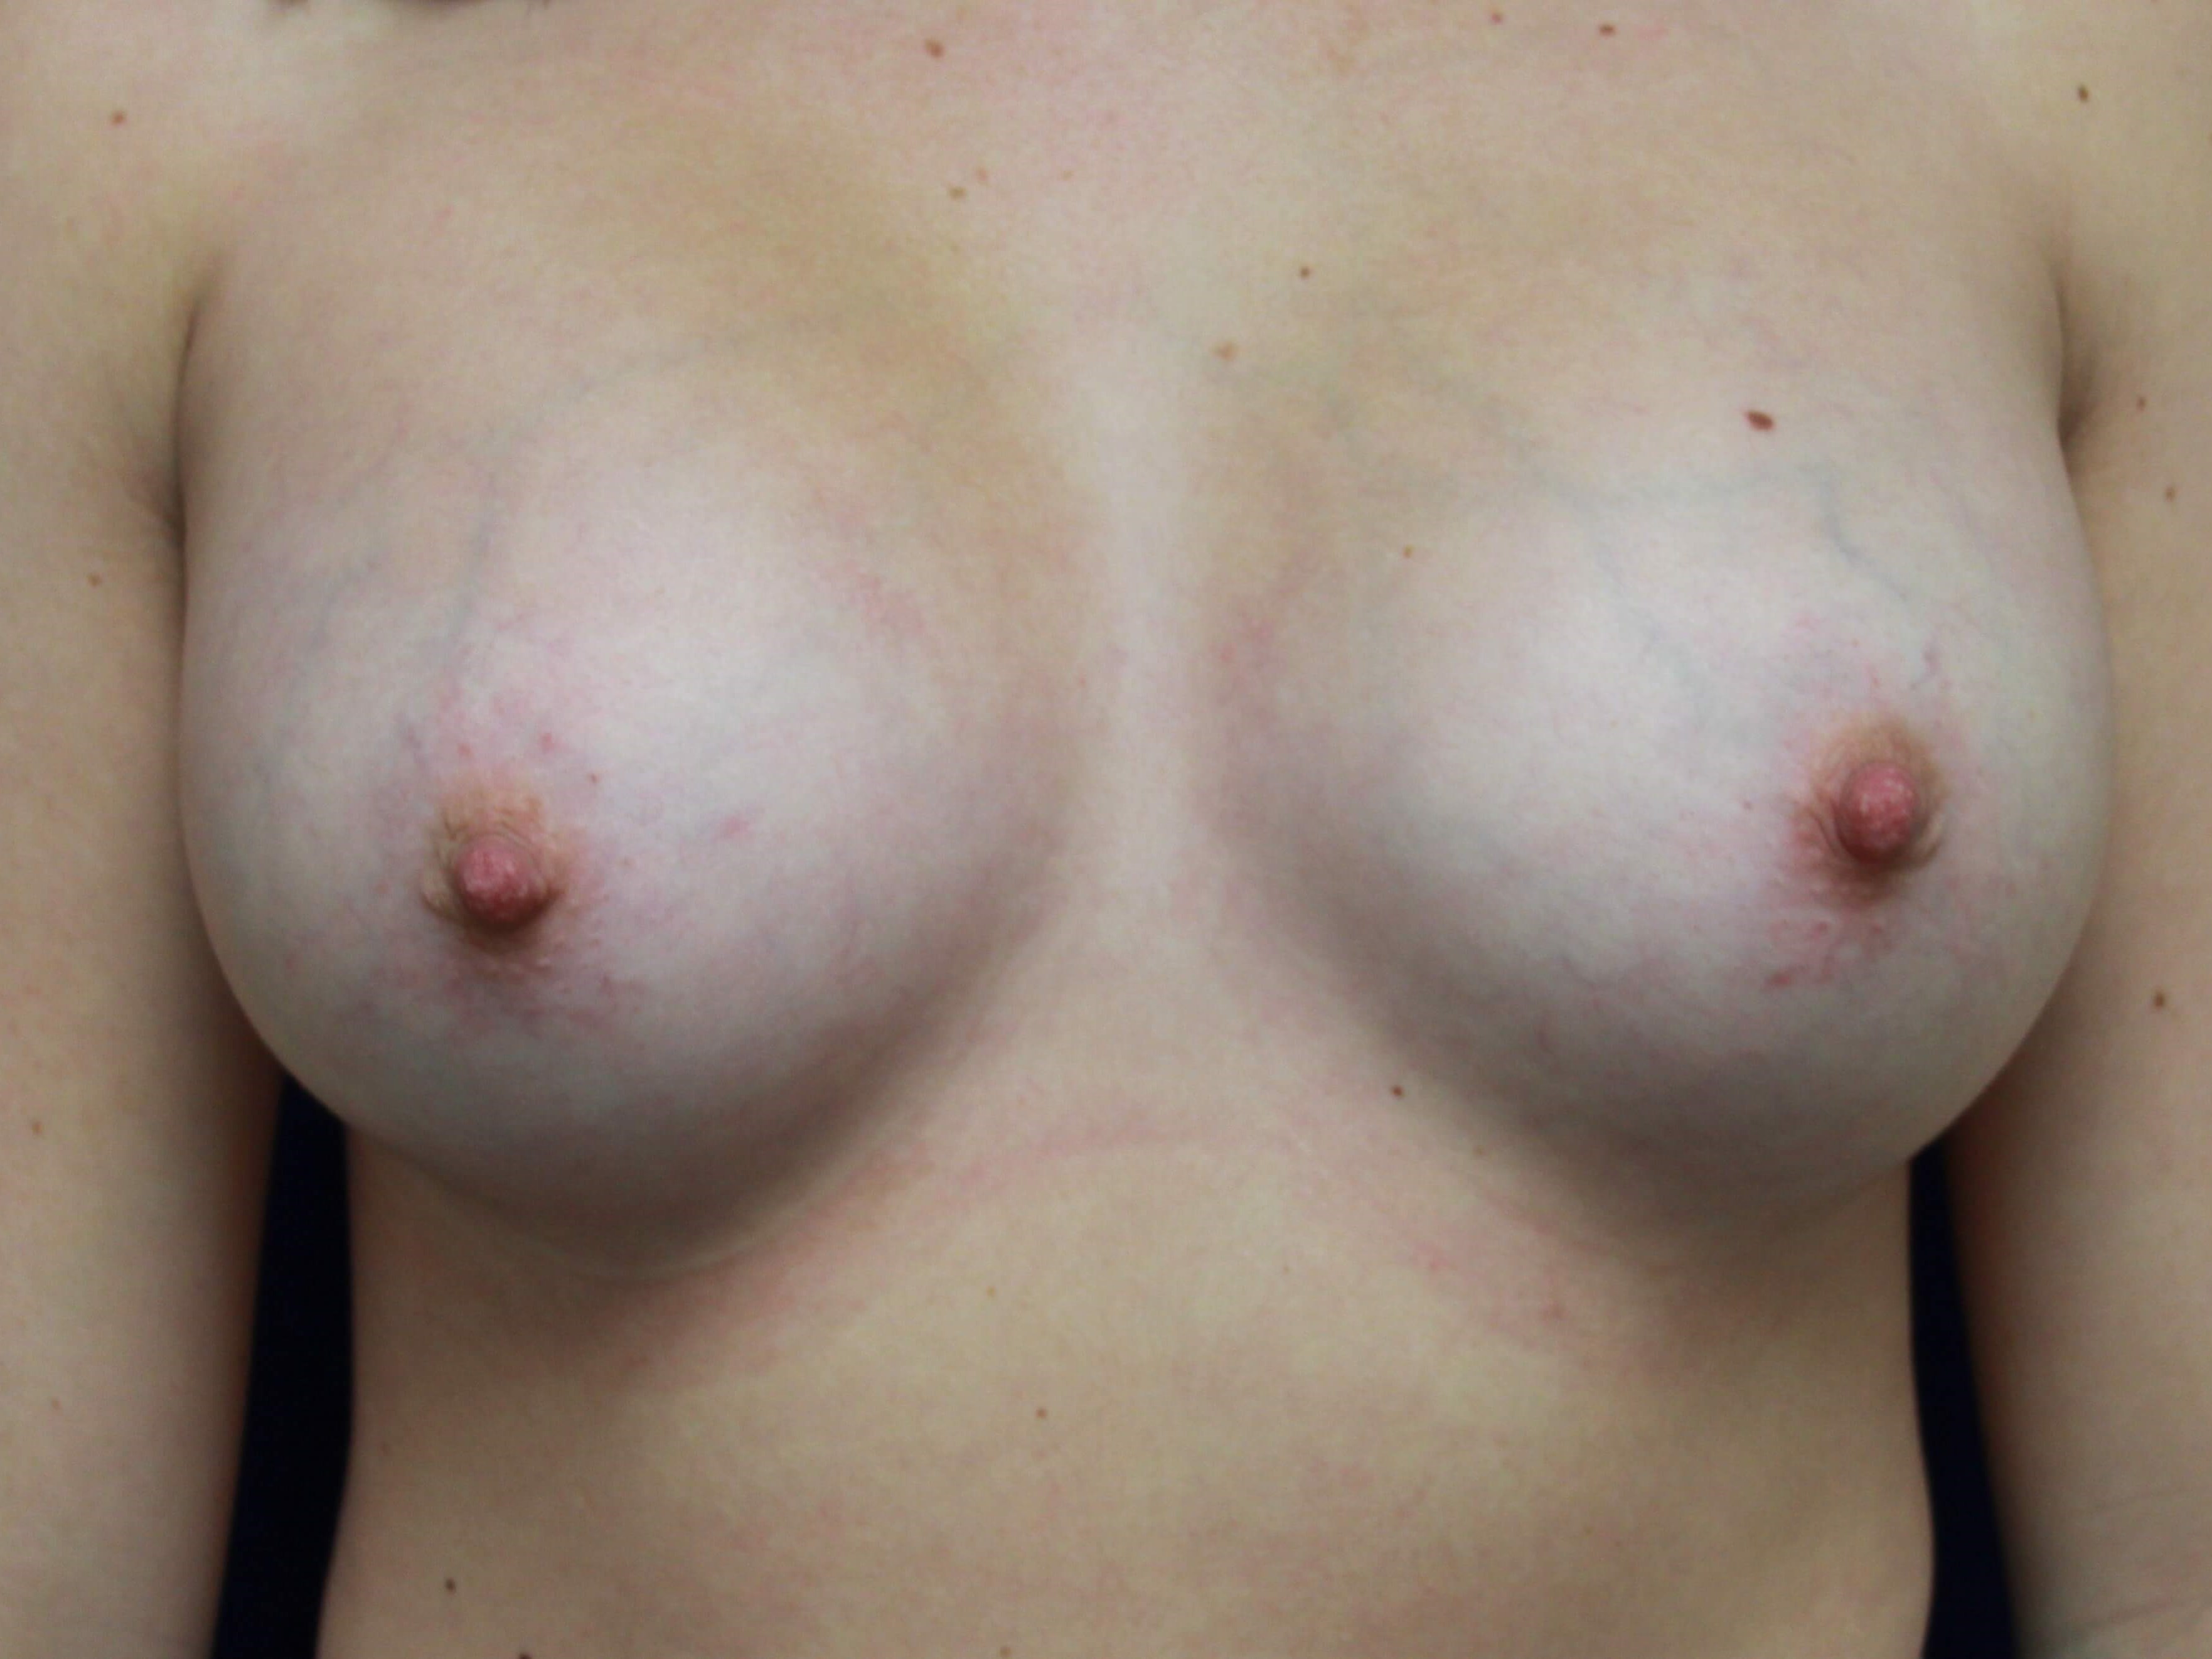 TUBA Implants Before and After After Breast Implants